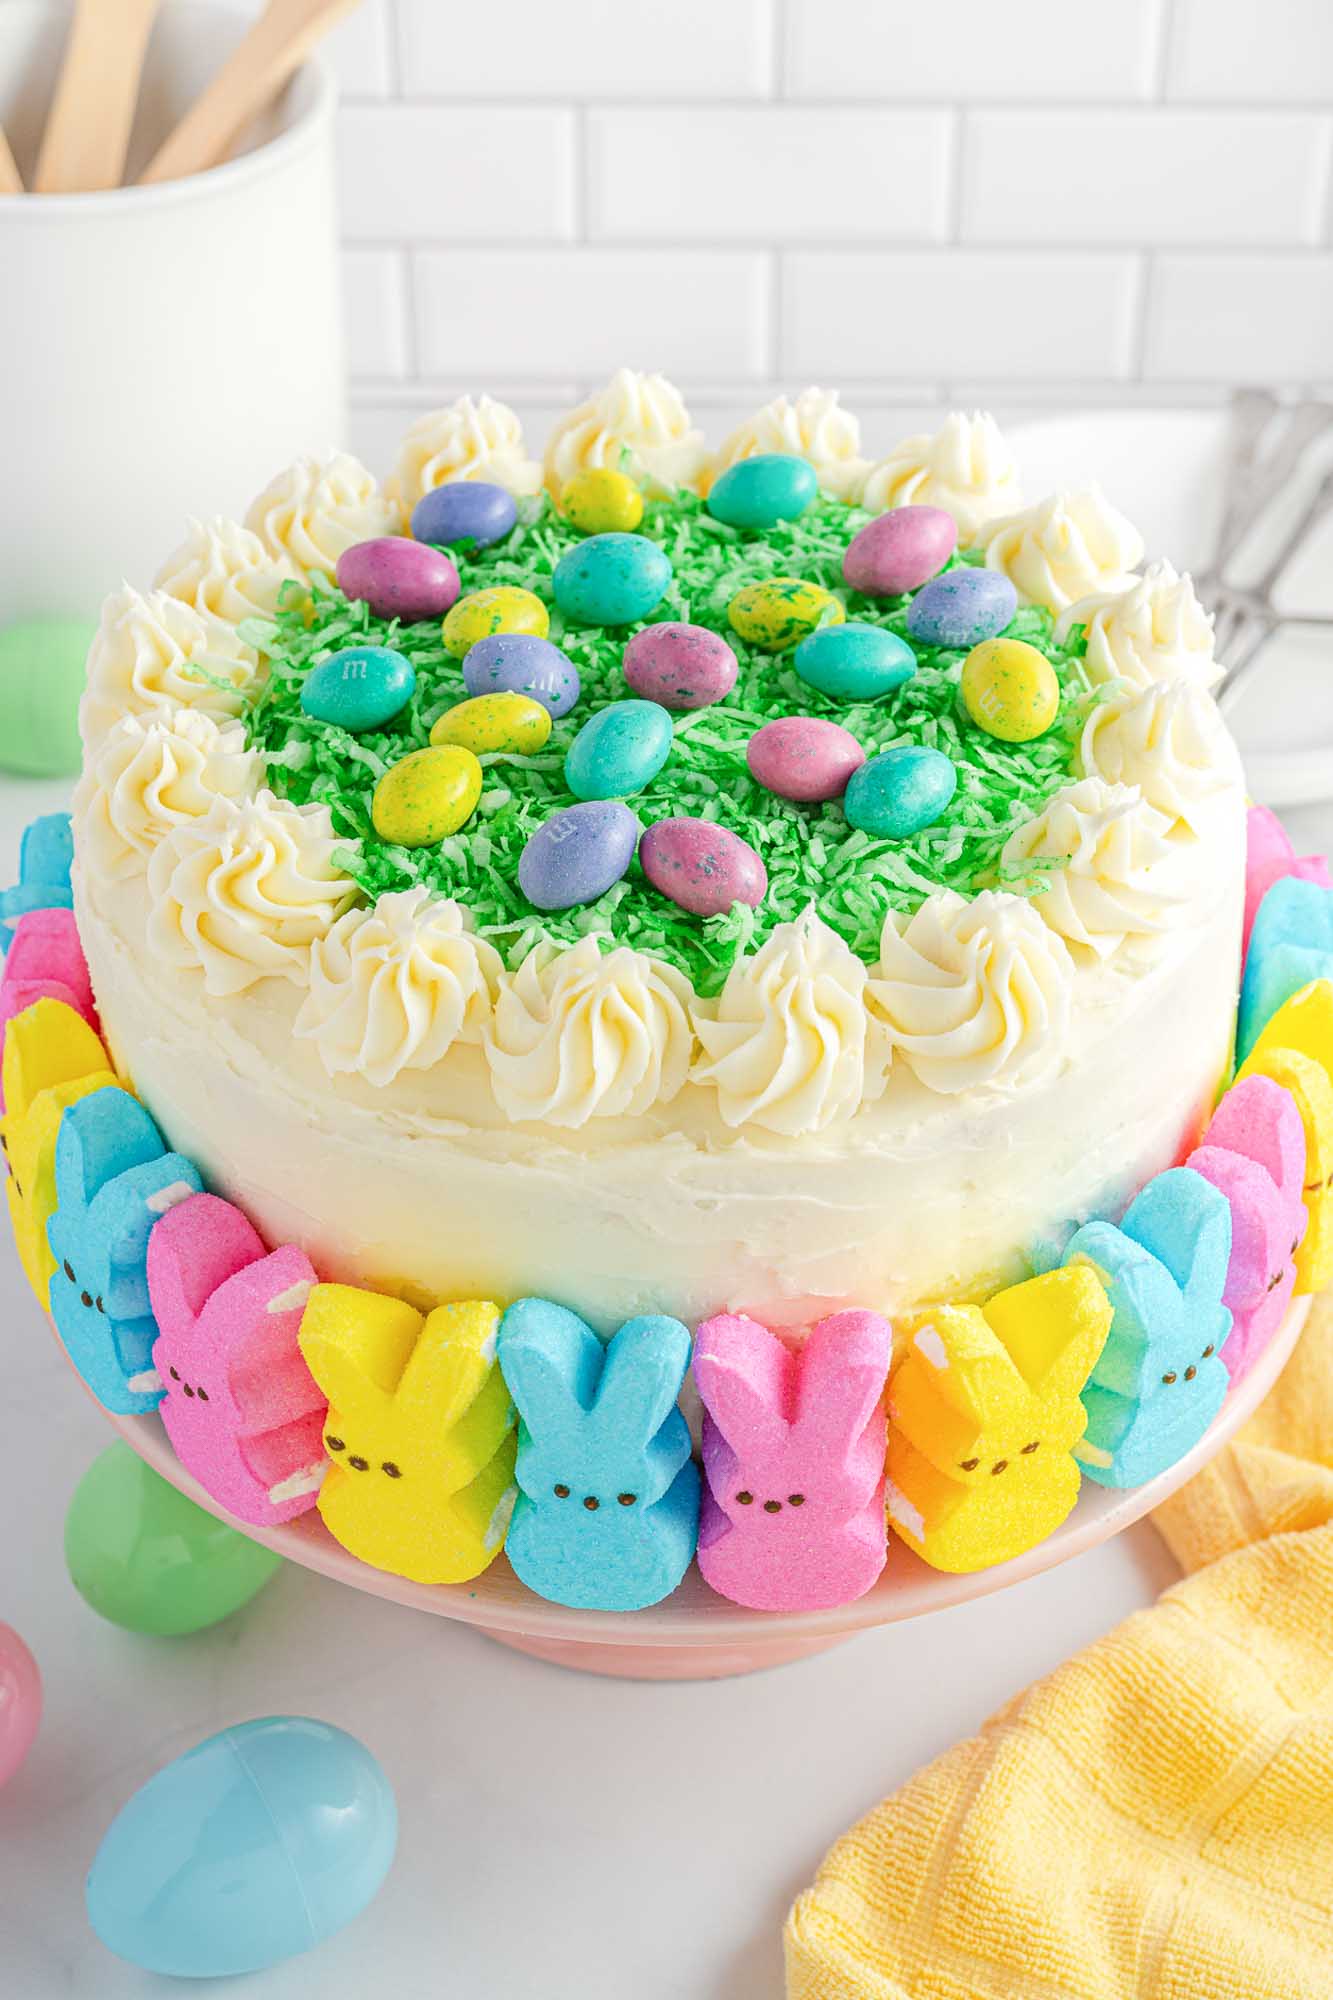 Easter Peep Cake With Multi-Colored Layers